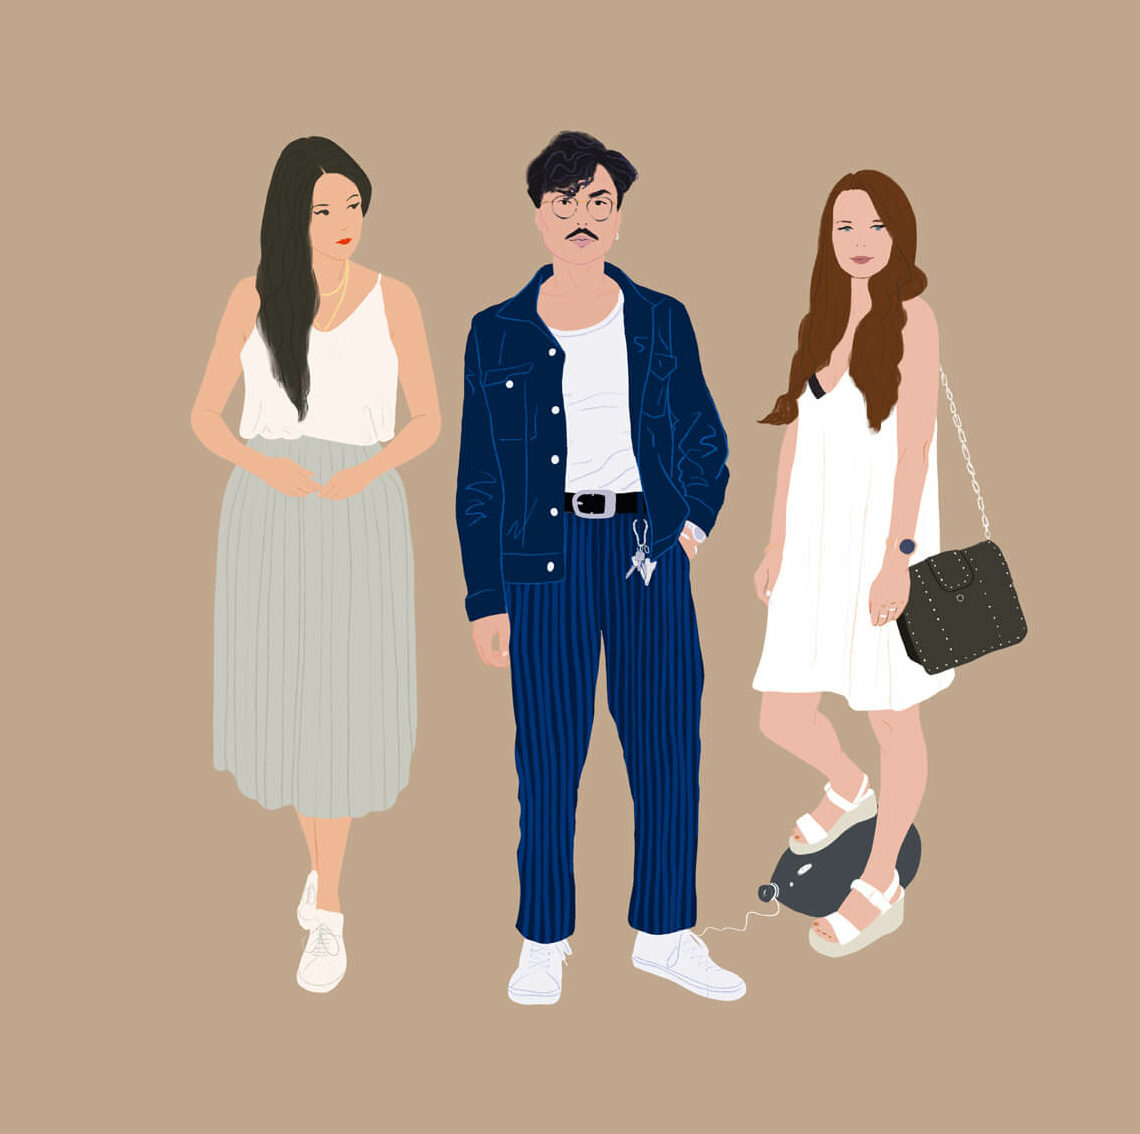 Private Commission. A birthday present. A stylish man surrounded by two female friends. Lady in Red Cape Style.